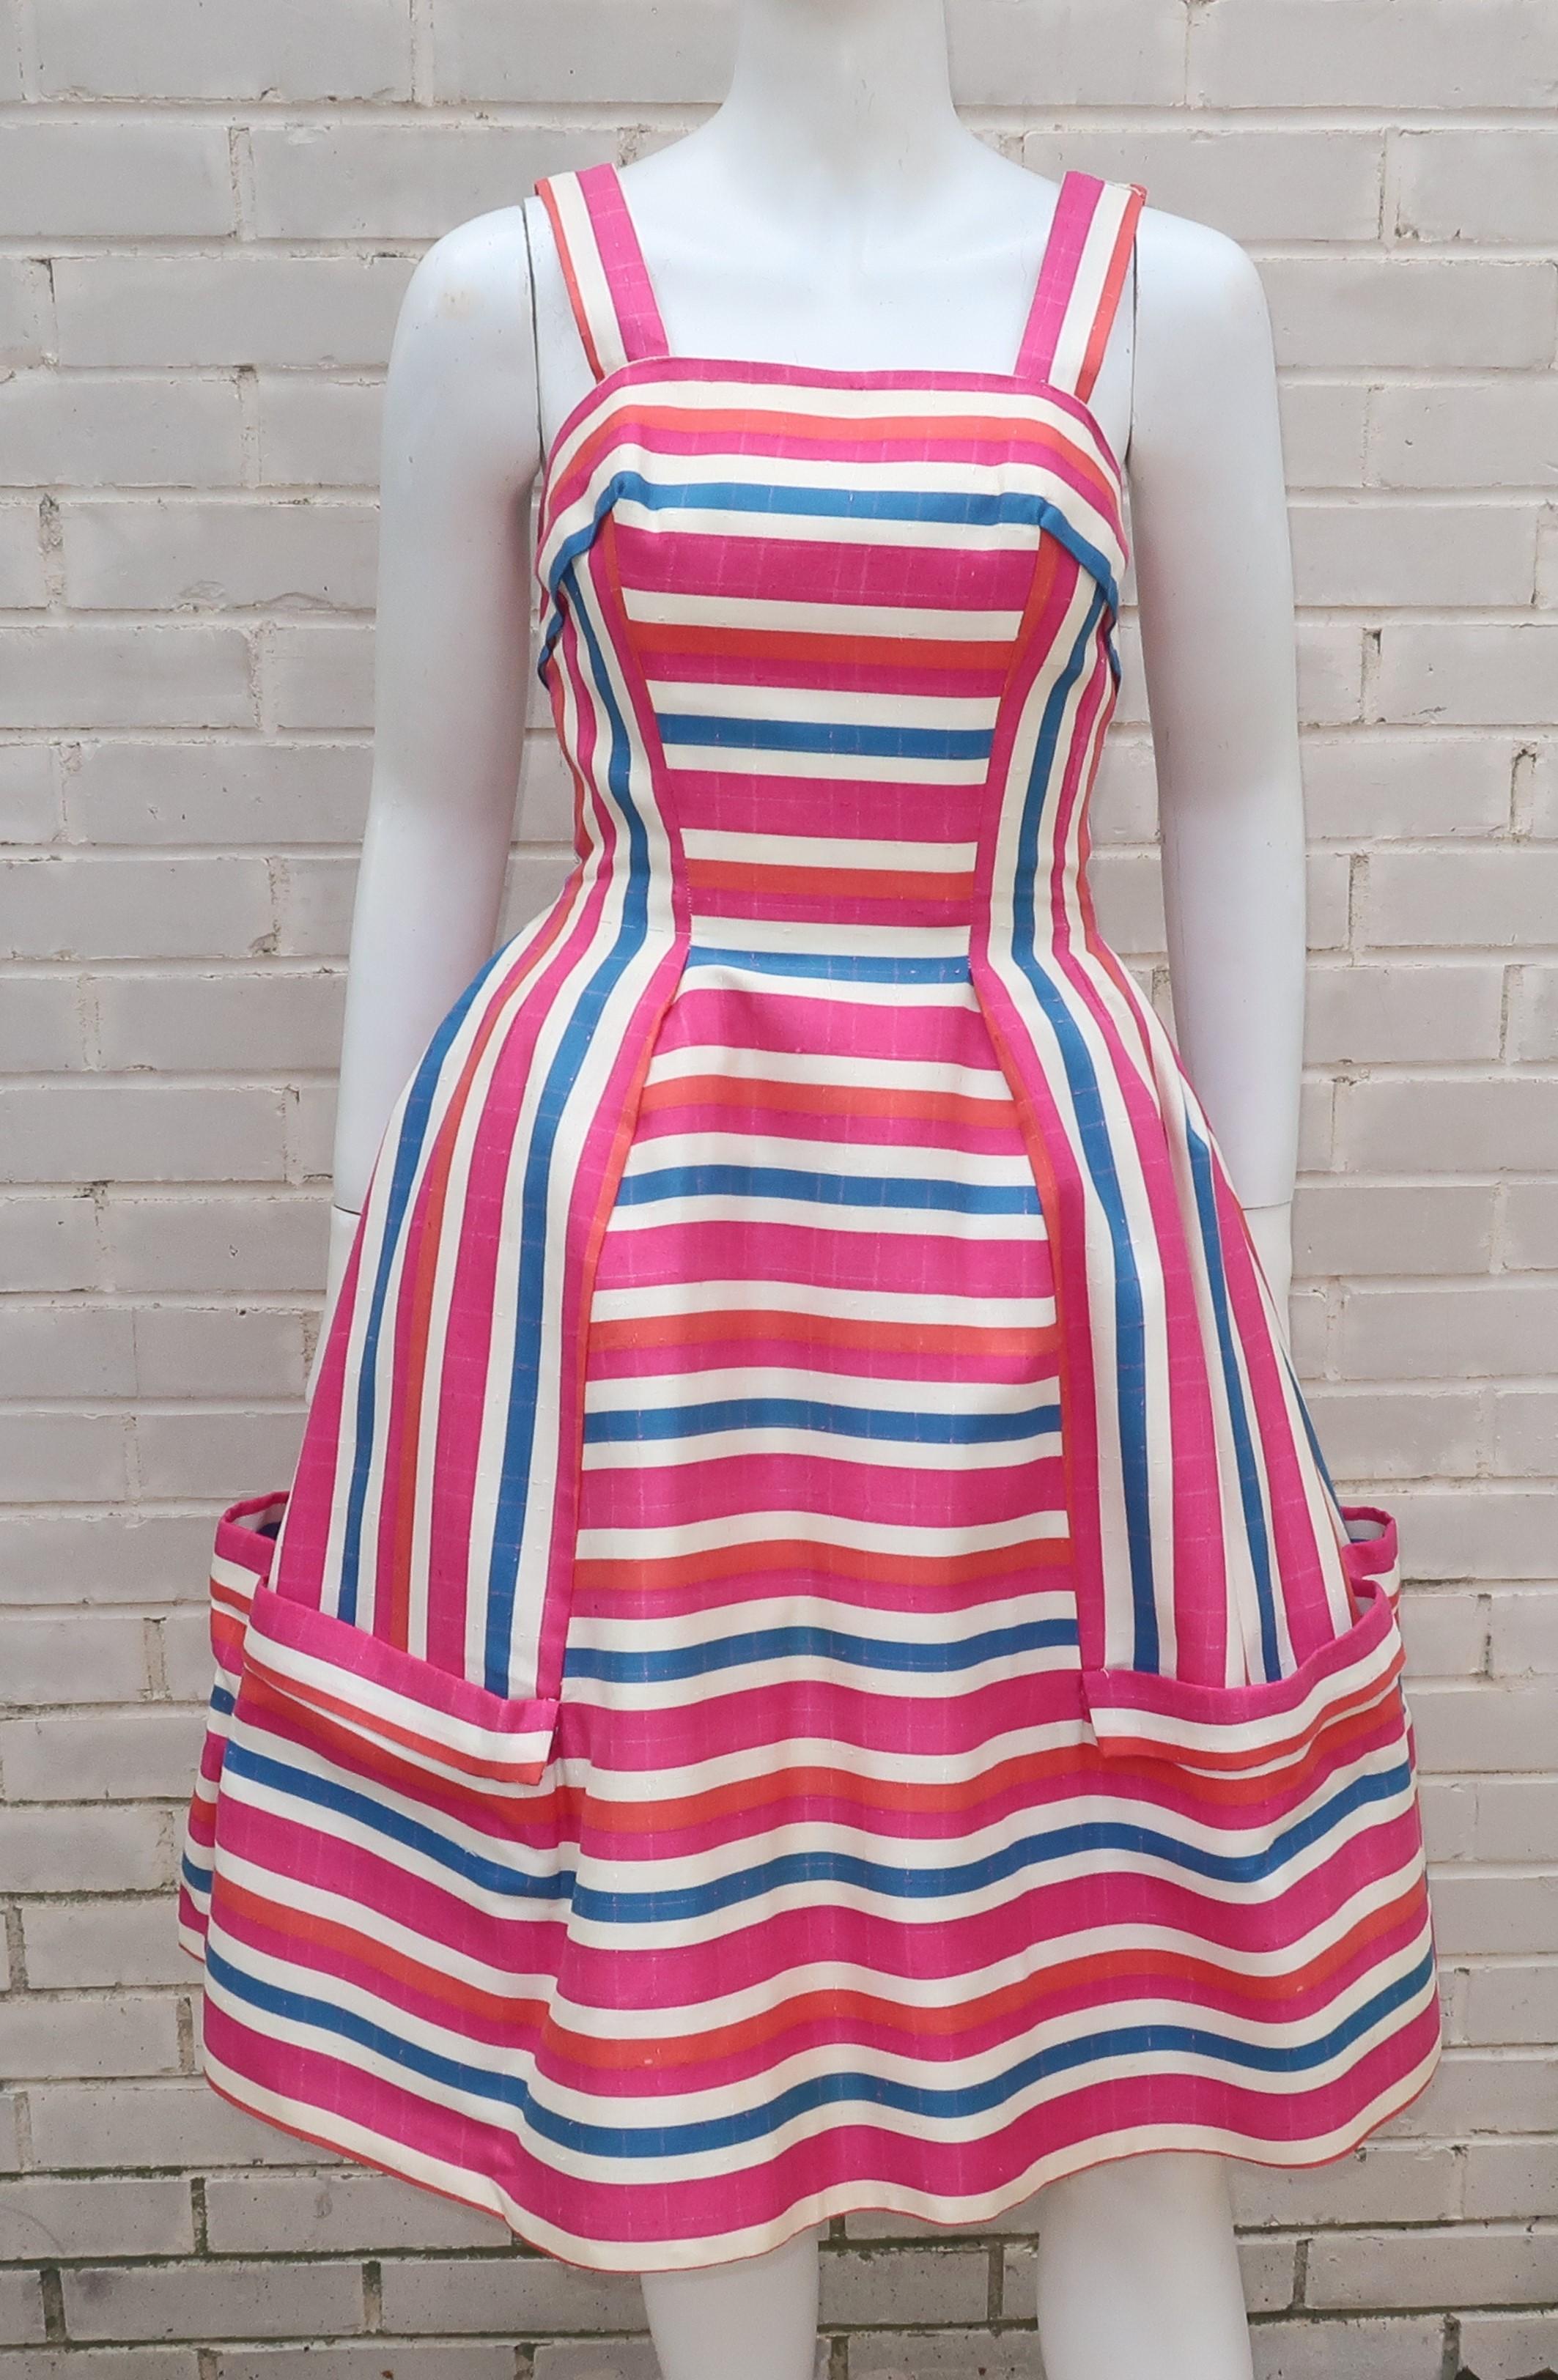 Adorable striped candy confection!  C.1960 party dress in a linen blend heavy striped fabric in shades of hot pink, orangey-red, royal blue and white.  It zips and hooks at the back with acetate lining in the bodice and a netted built-in crinoline